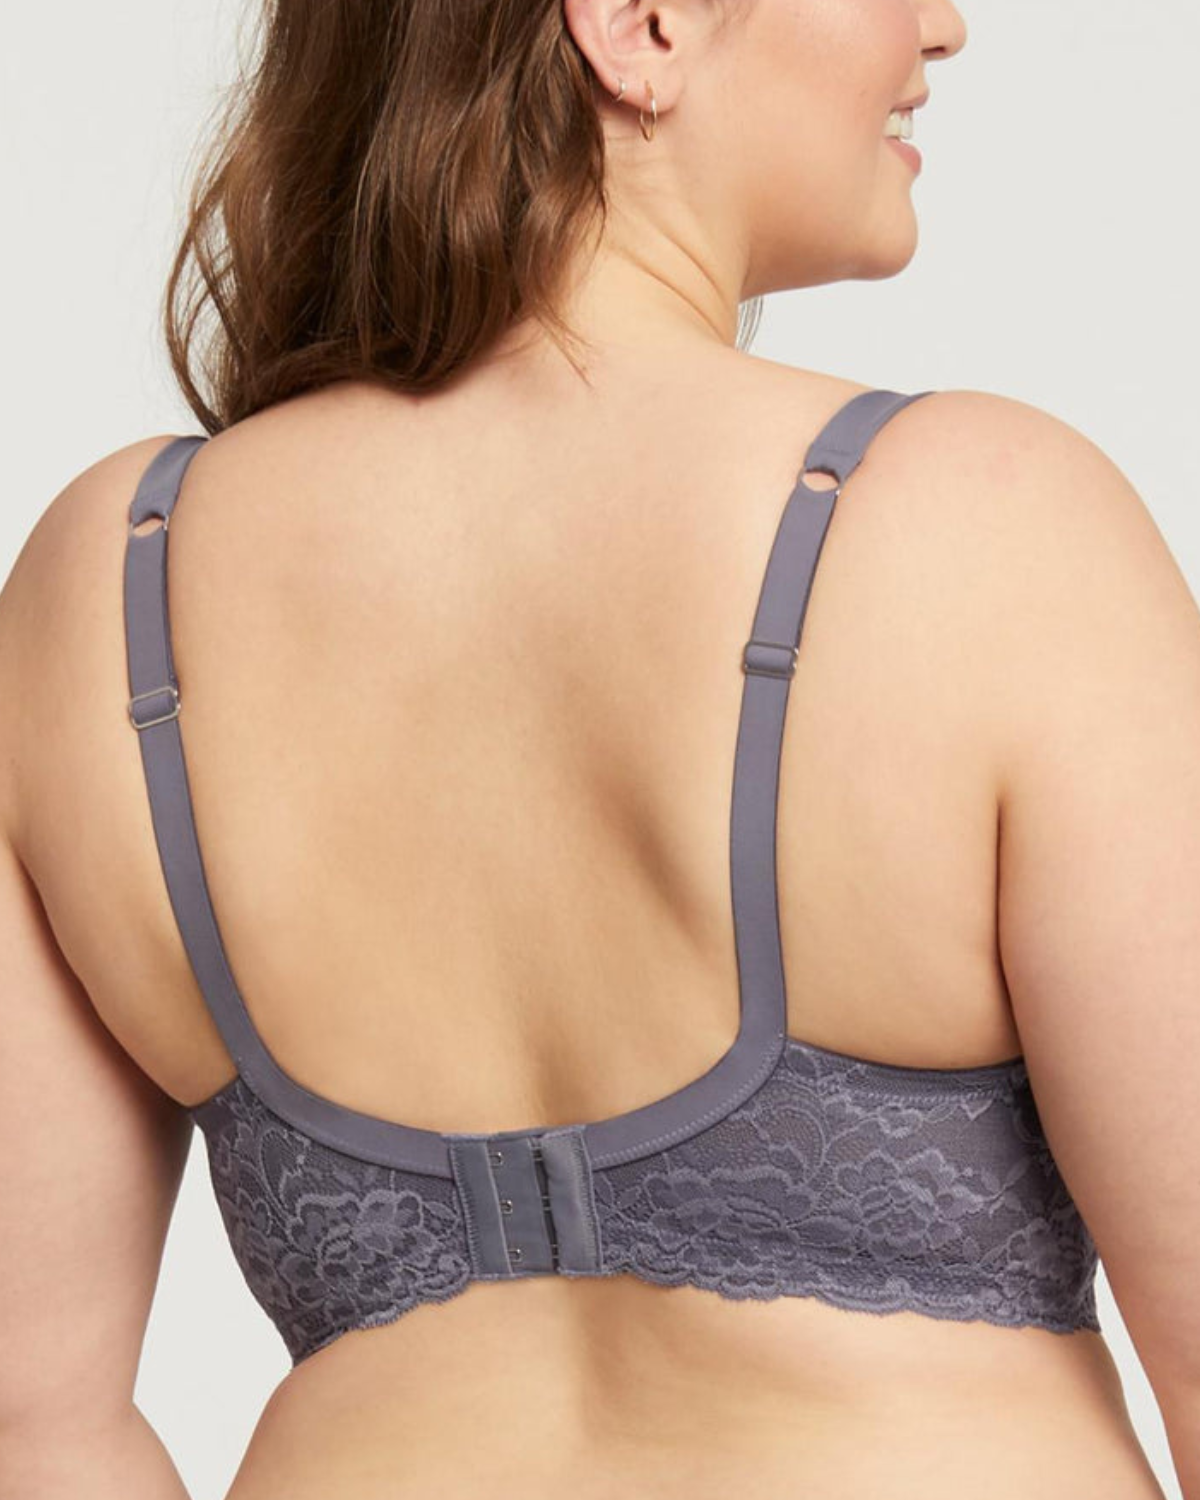 Model wearing a molded t-shirt underwire bra with lace side wings in grey